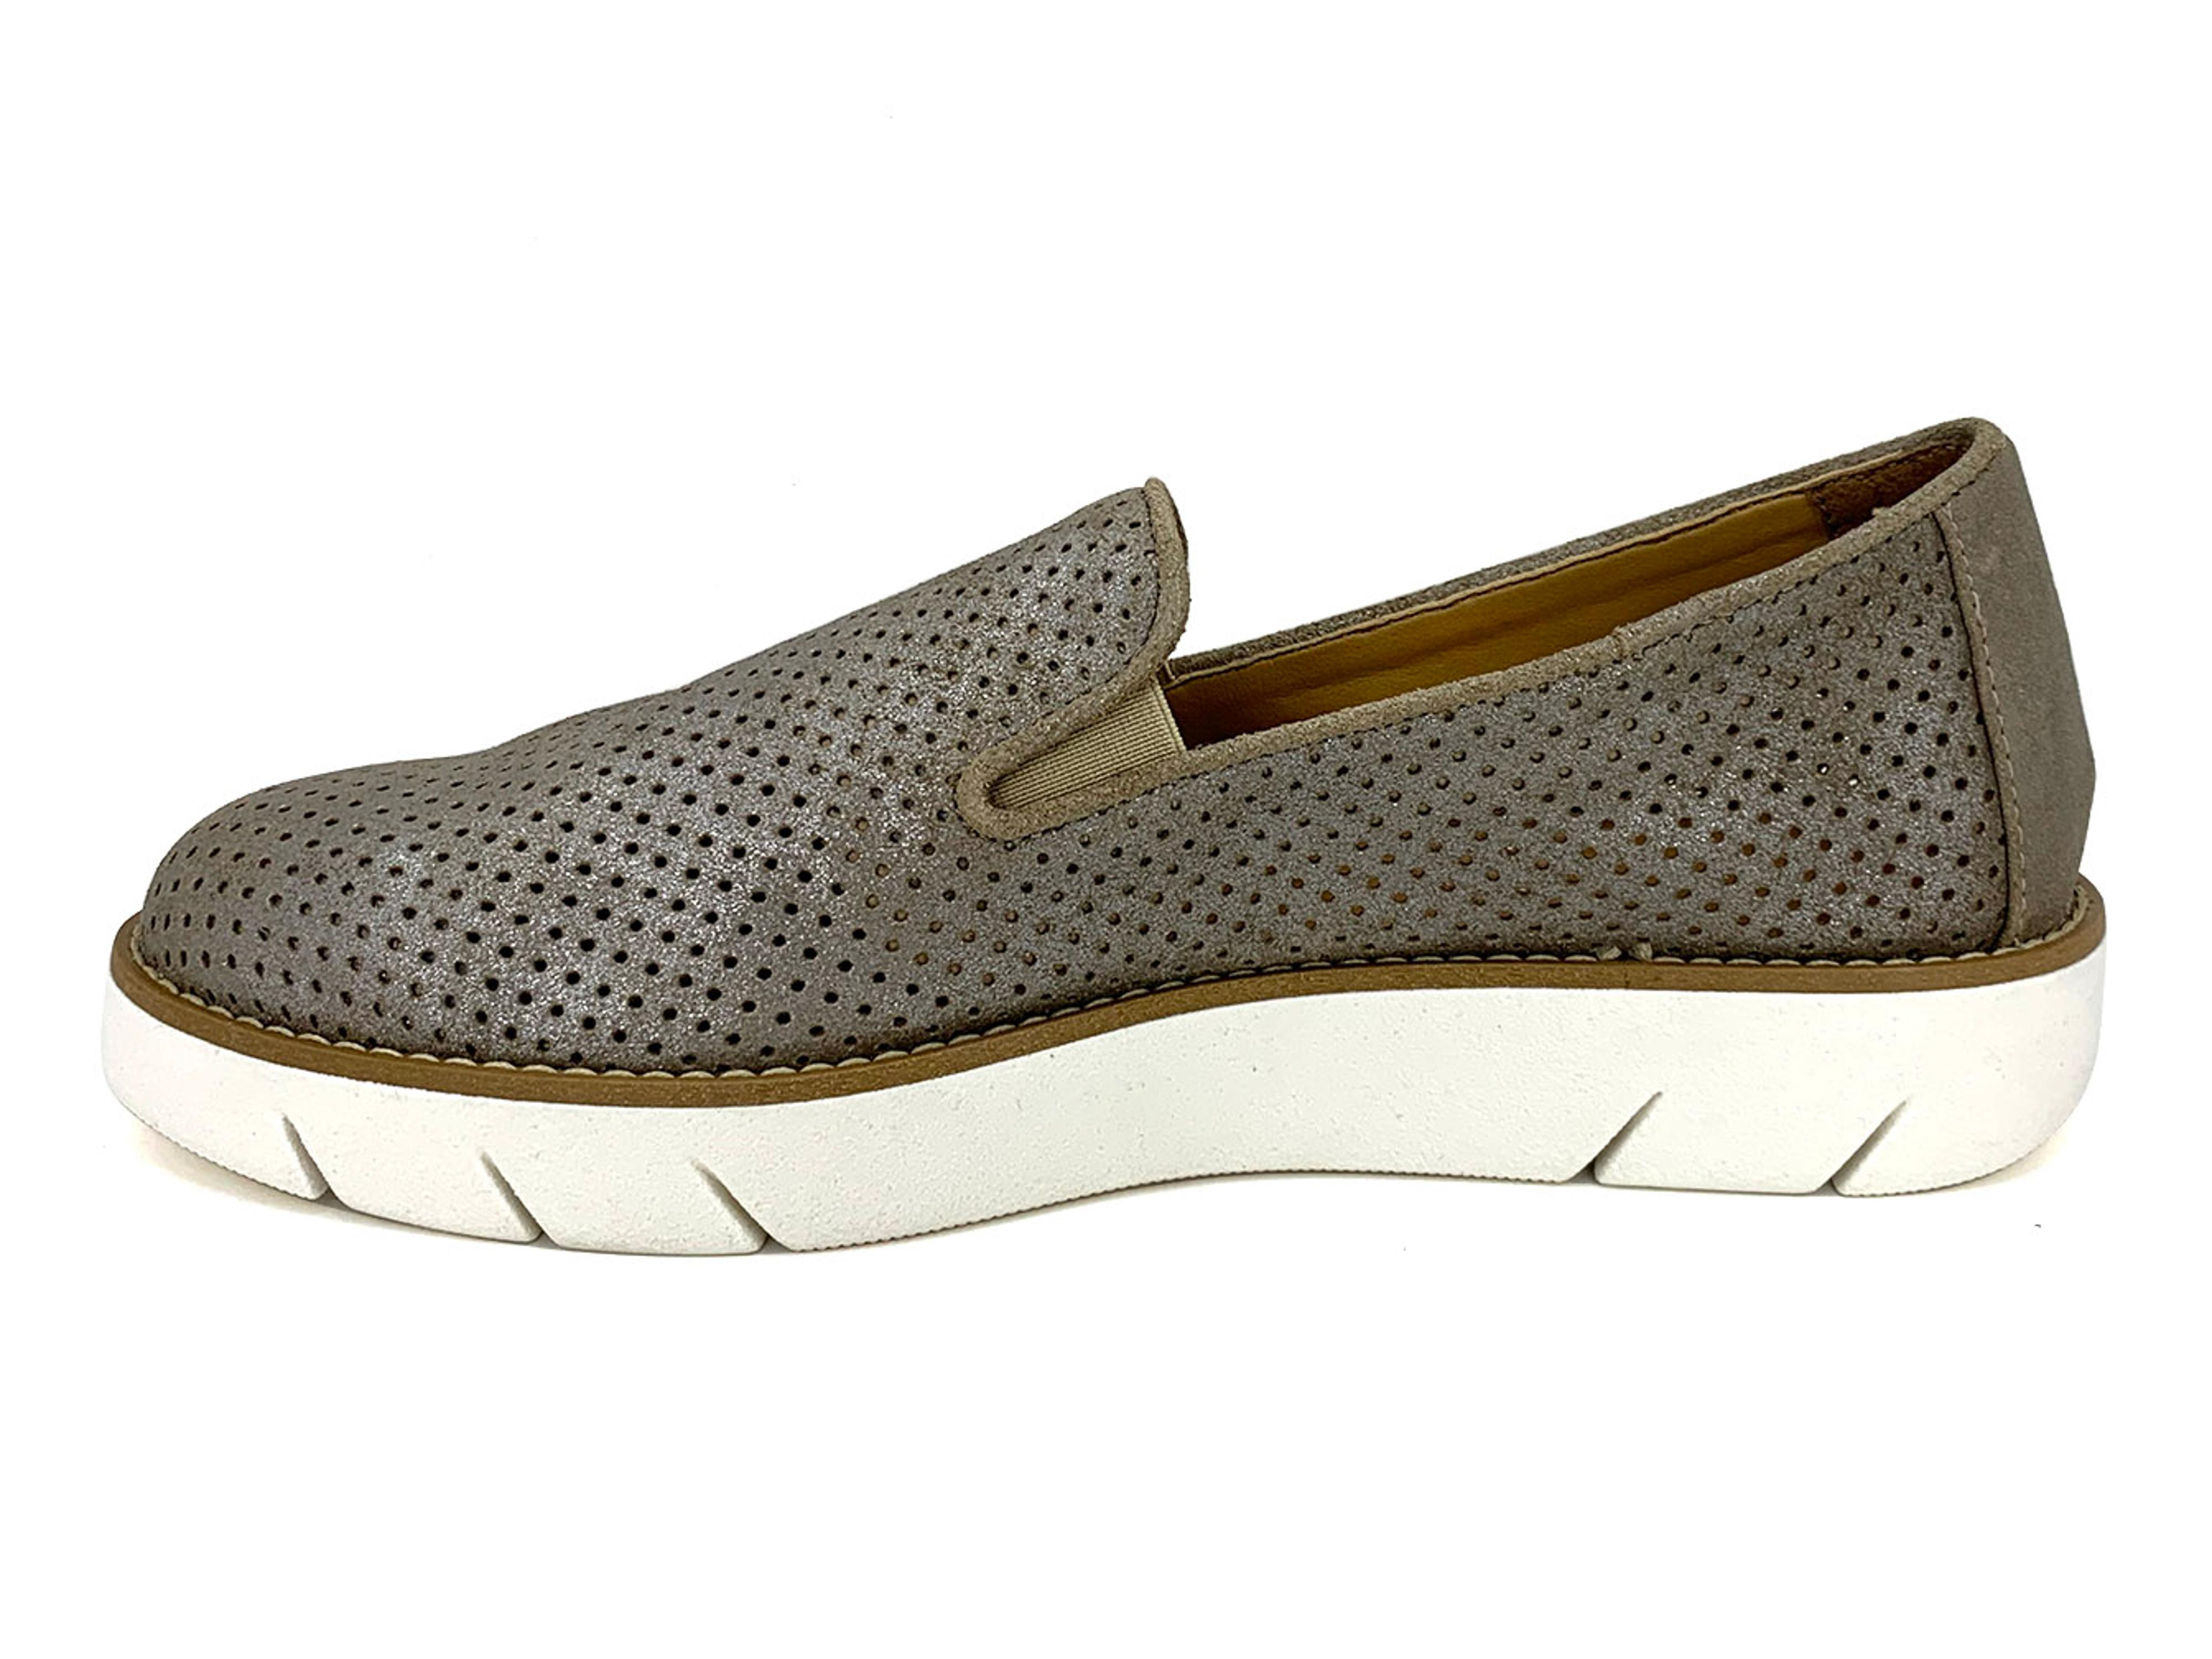 The FLEXX Daily Women's Slip-on Shoe Taupe : The Shoe Spa